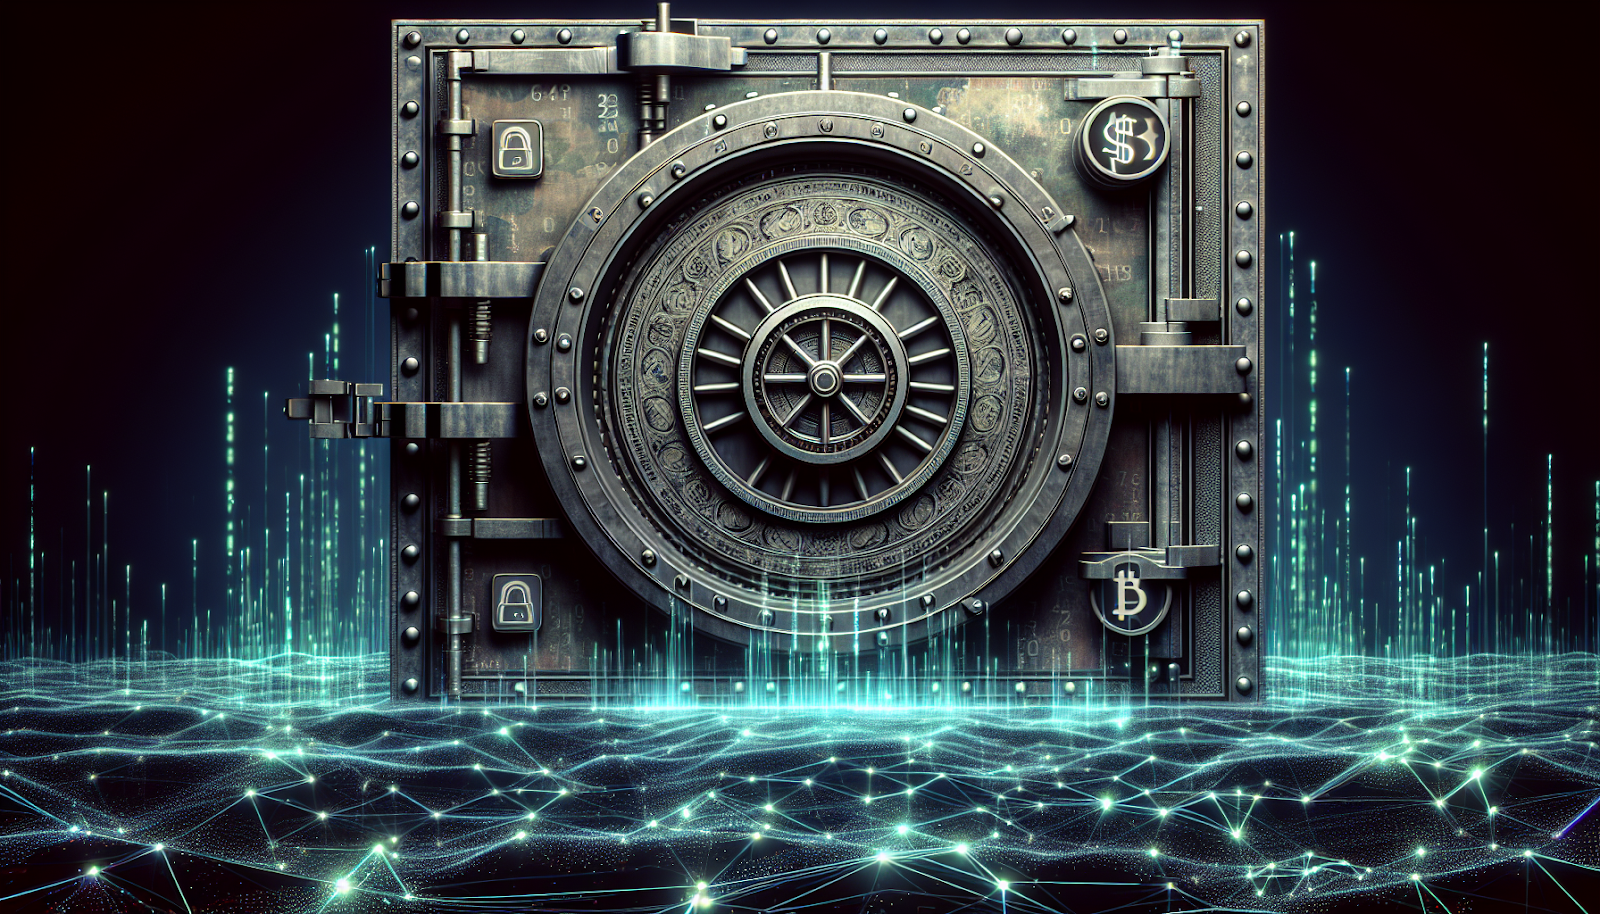 Image of a secure vault to represent financial stability and security of solvent online casinos